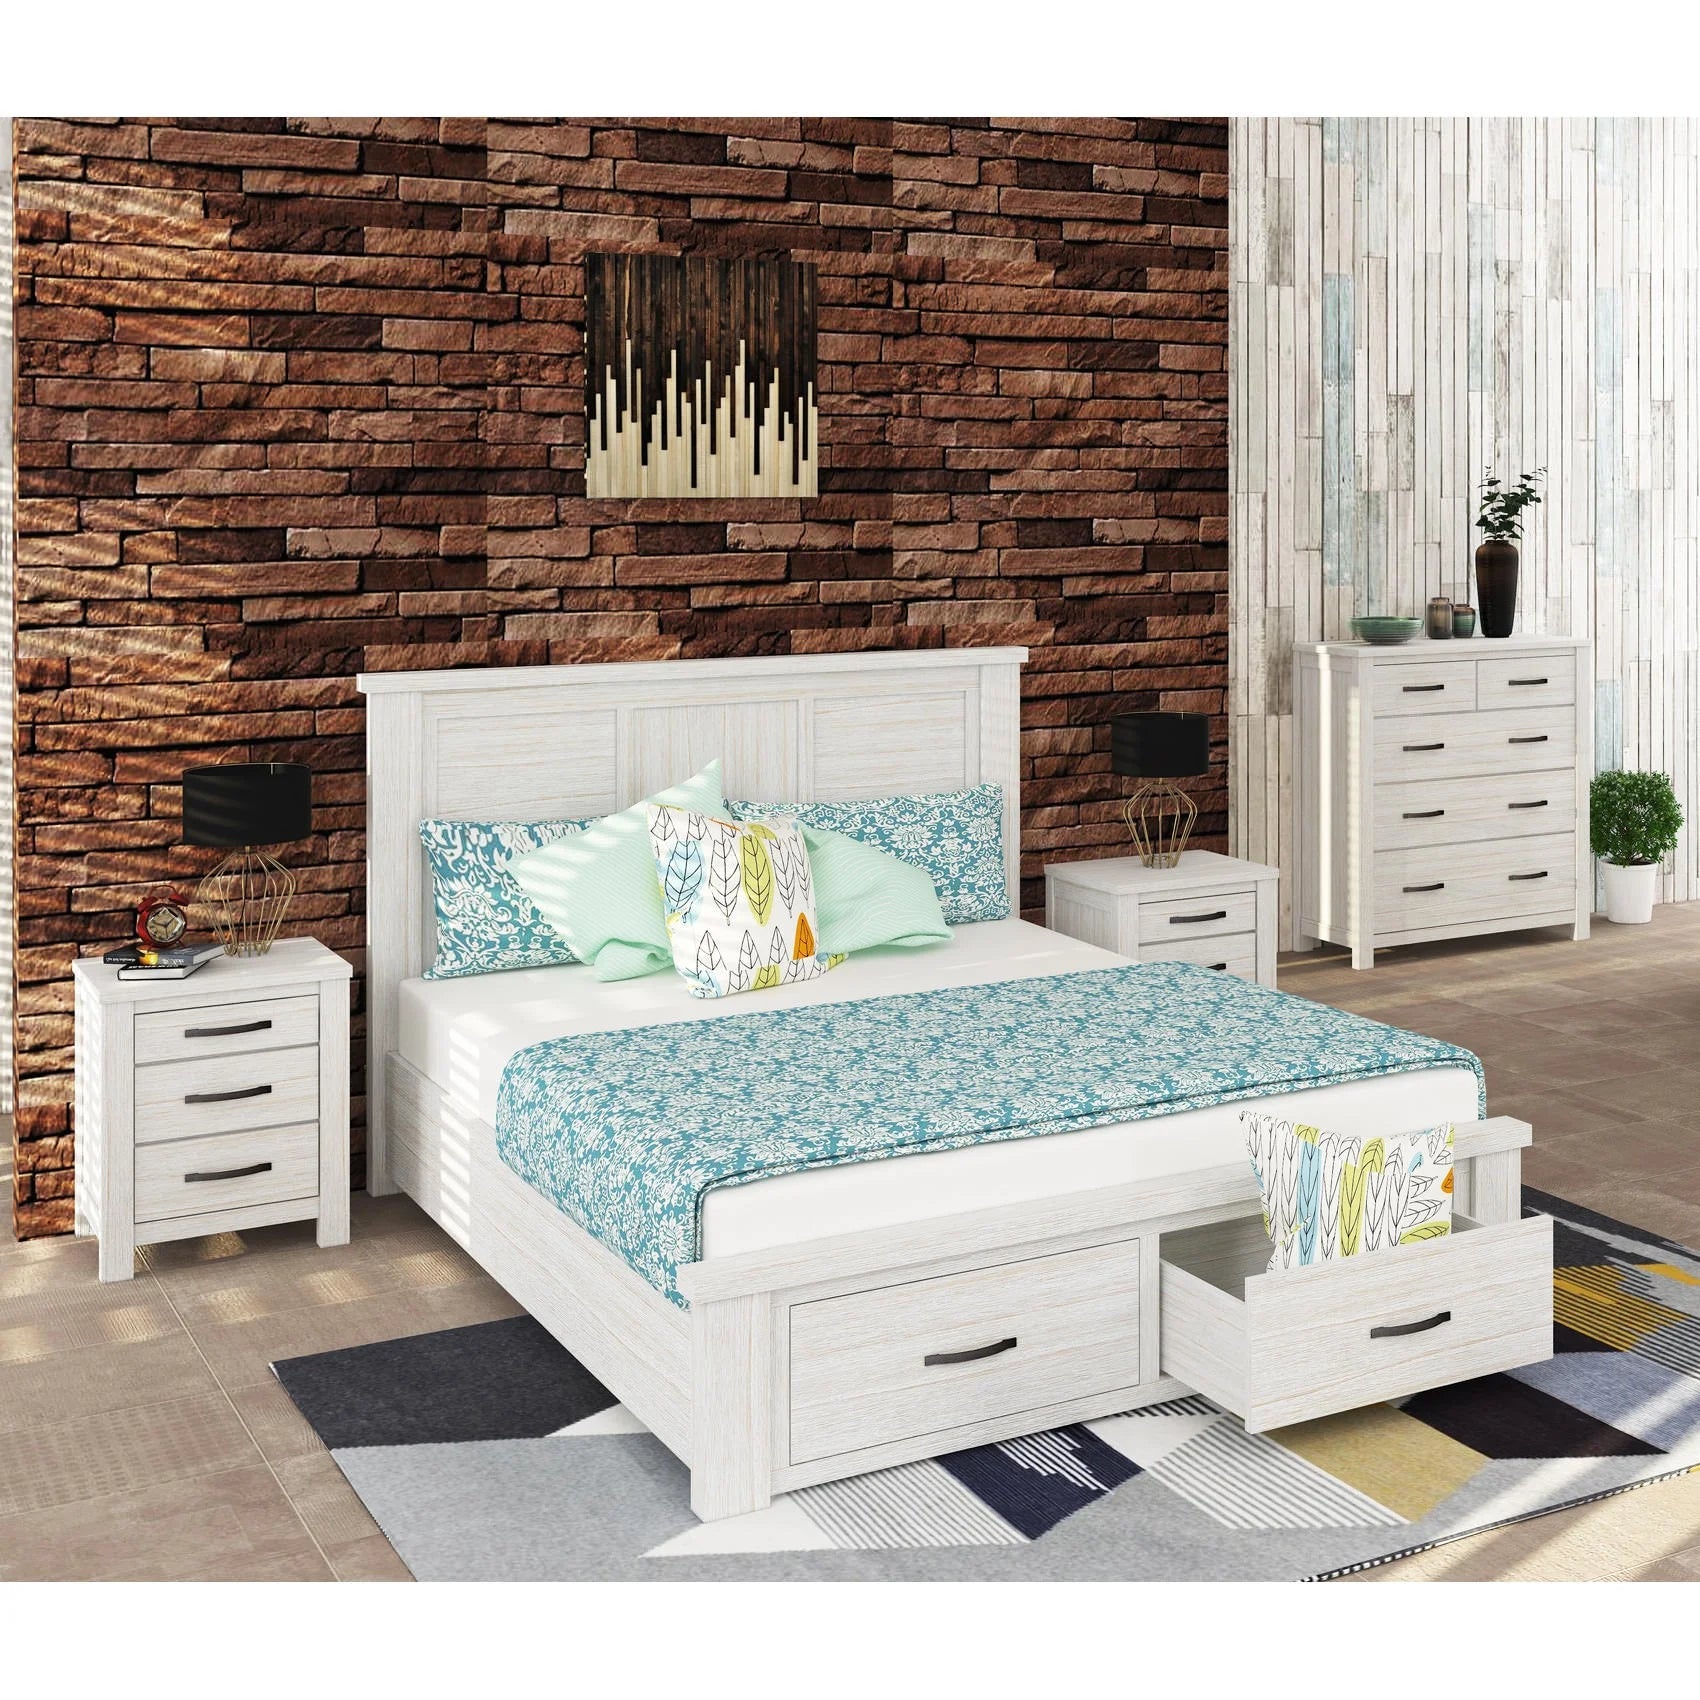 Frankie Mountain Ash Timber 4 Piece Bedroom Suite with Tallboy, King